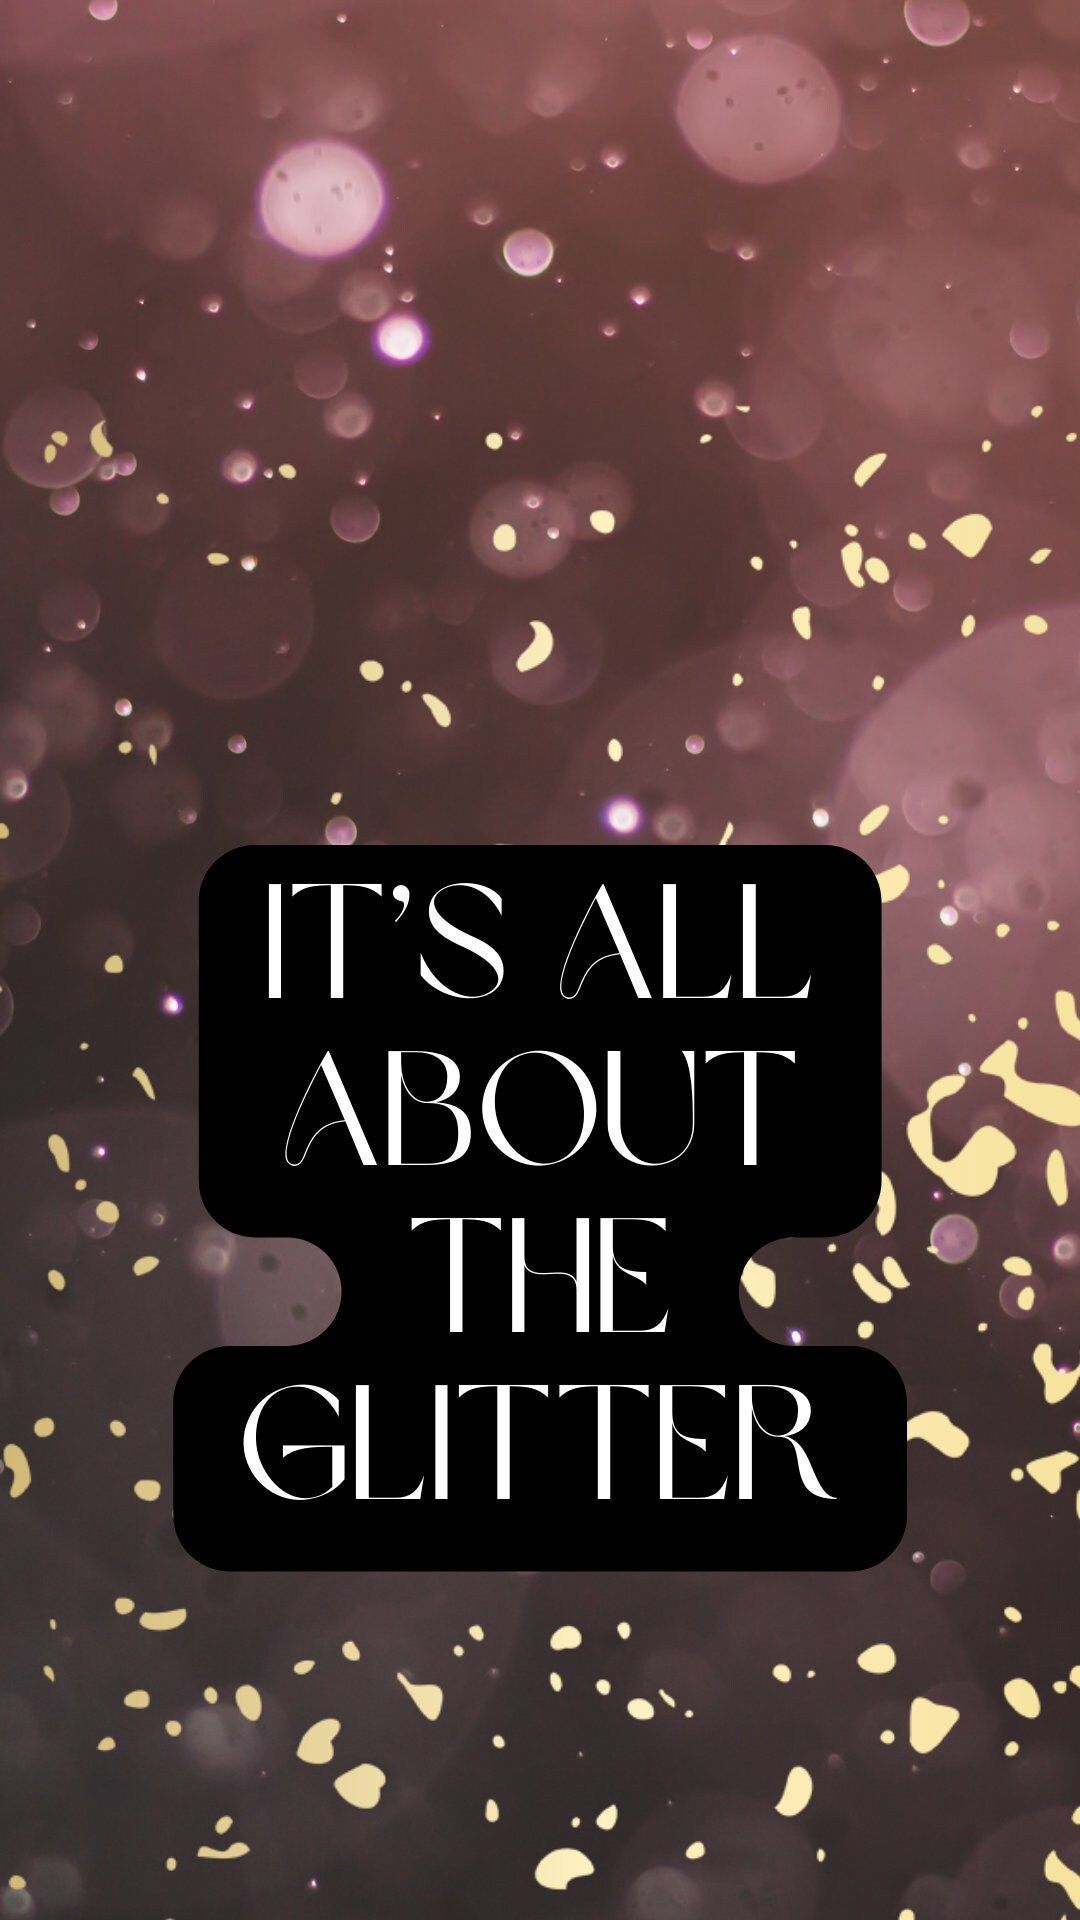 It's all about the glitter - Glitter